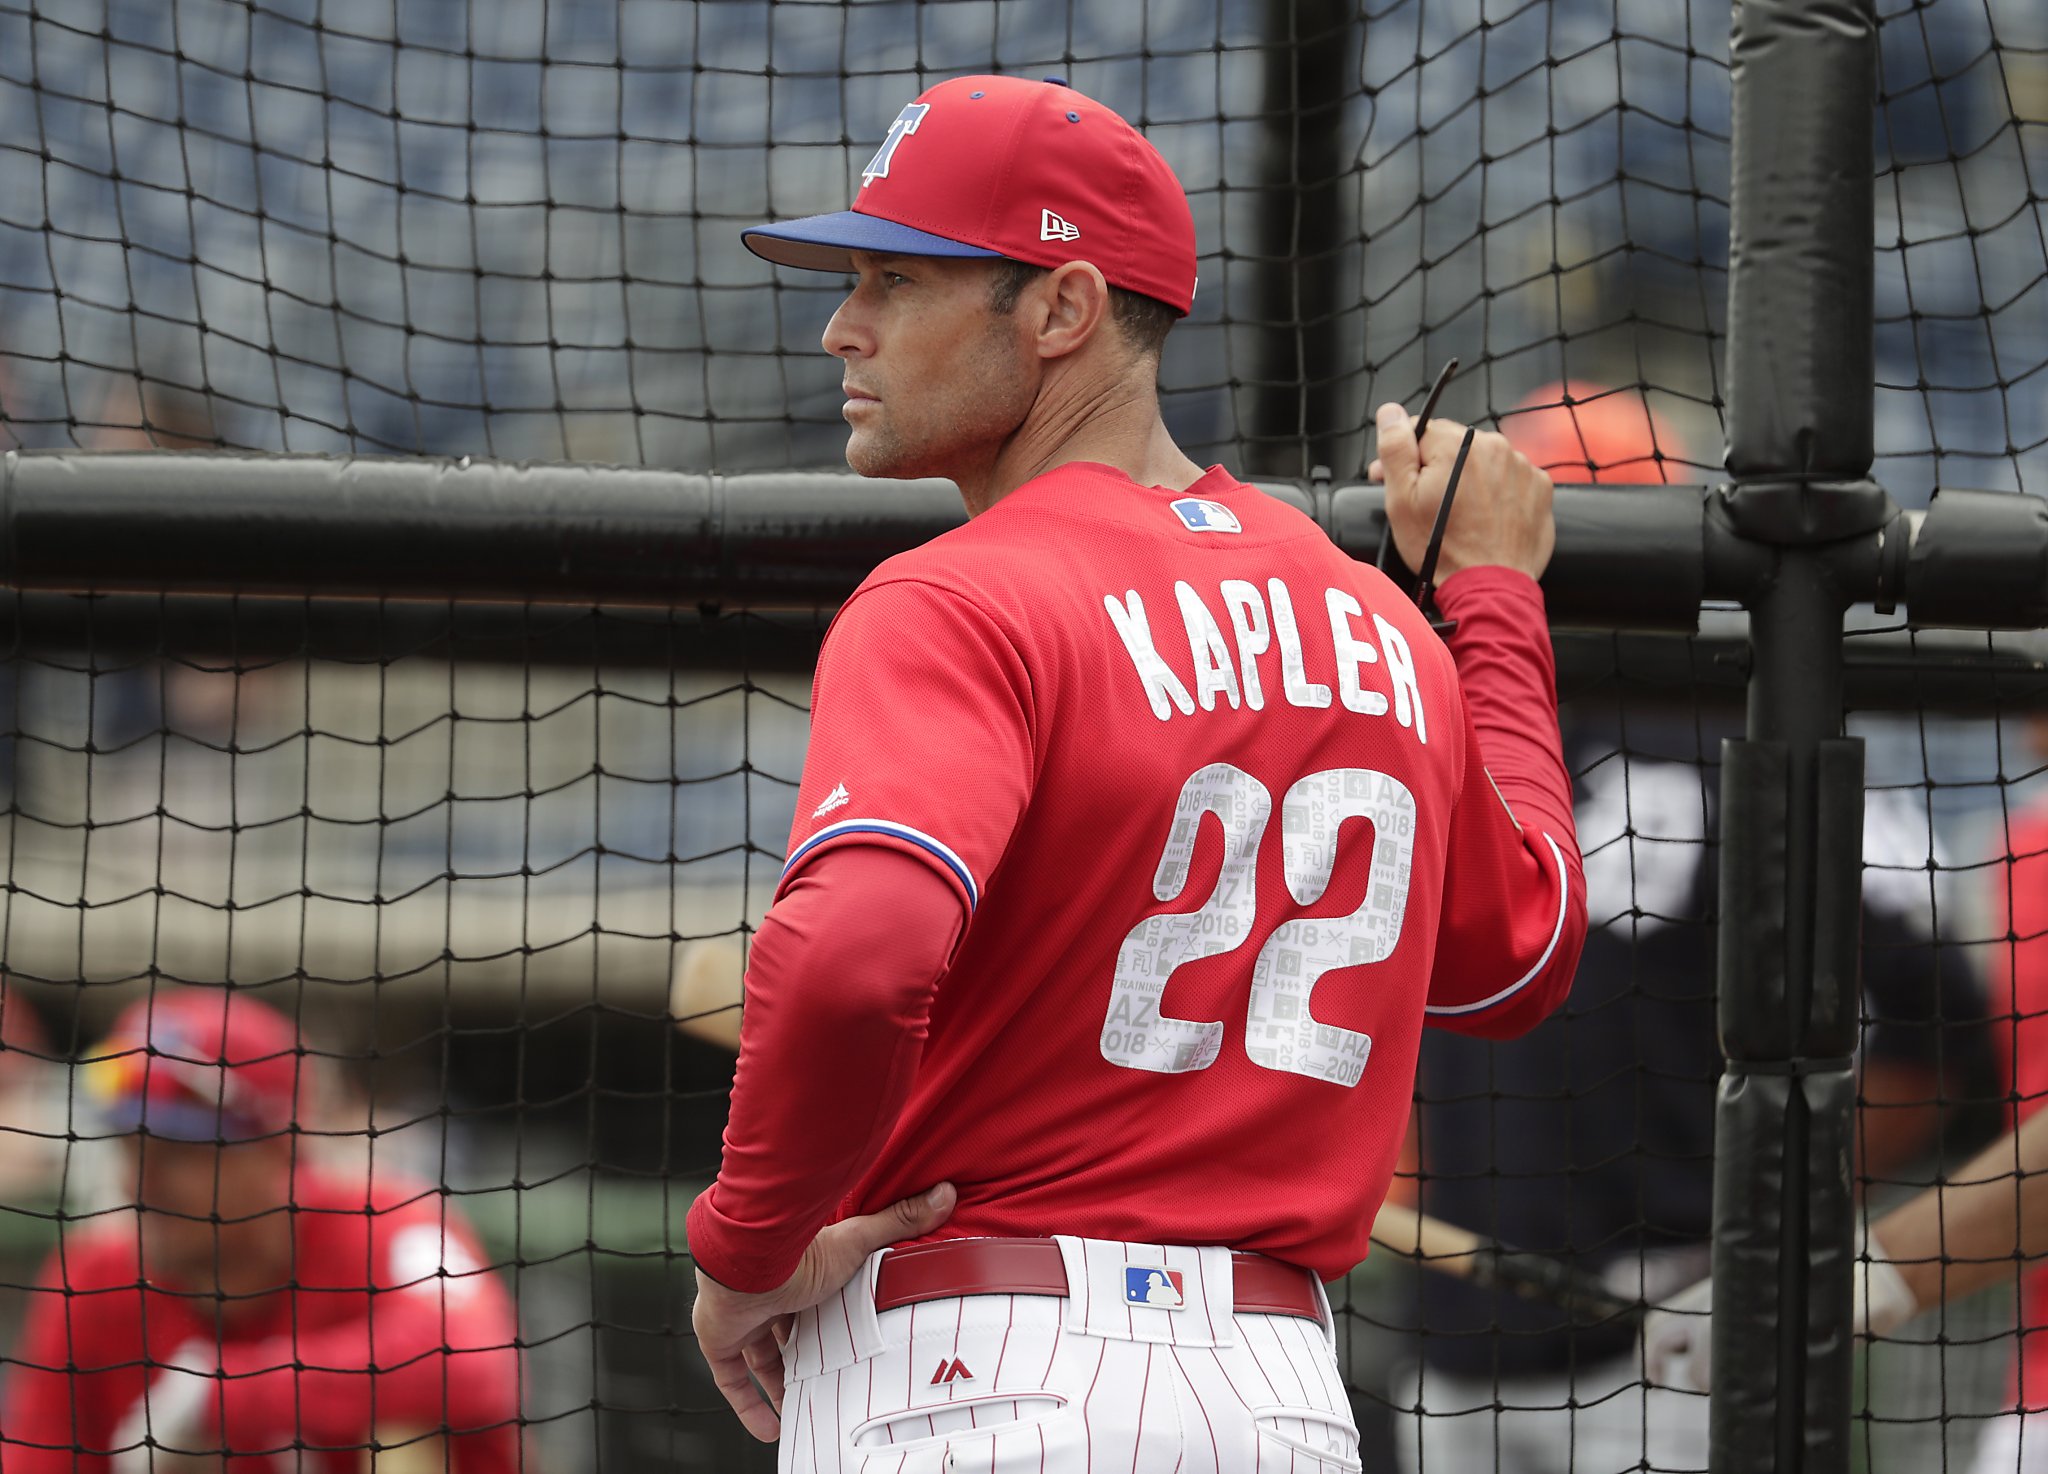 Giants hire Gabe Kapler to replace Bruce Bochy as manager